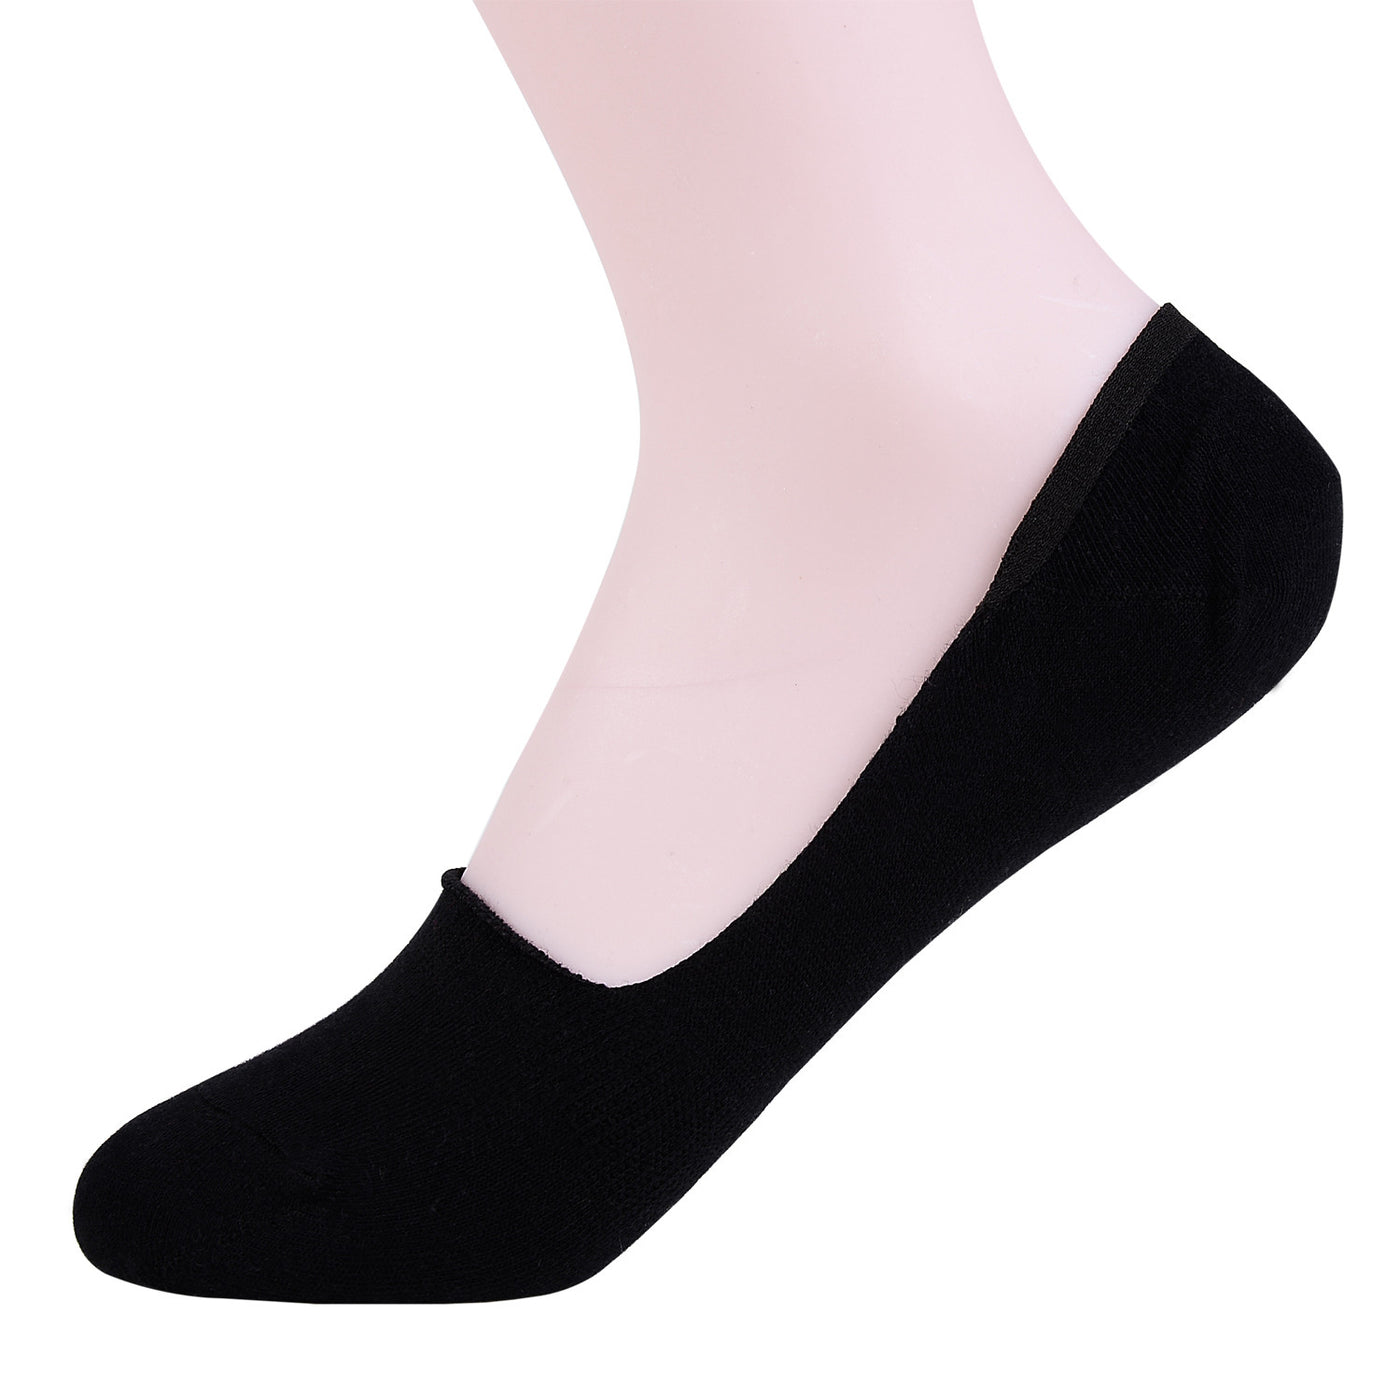 2 Pairs Finest Combed Cotton Invisible Socks Plain Black